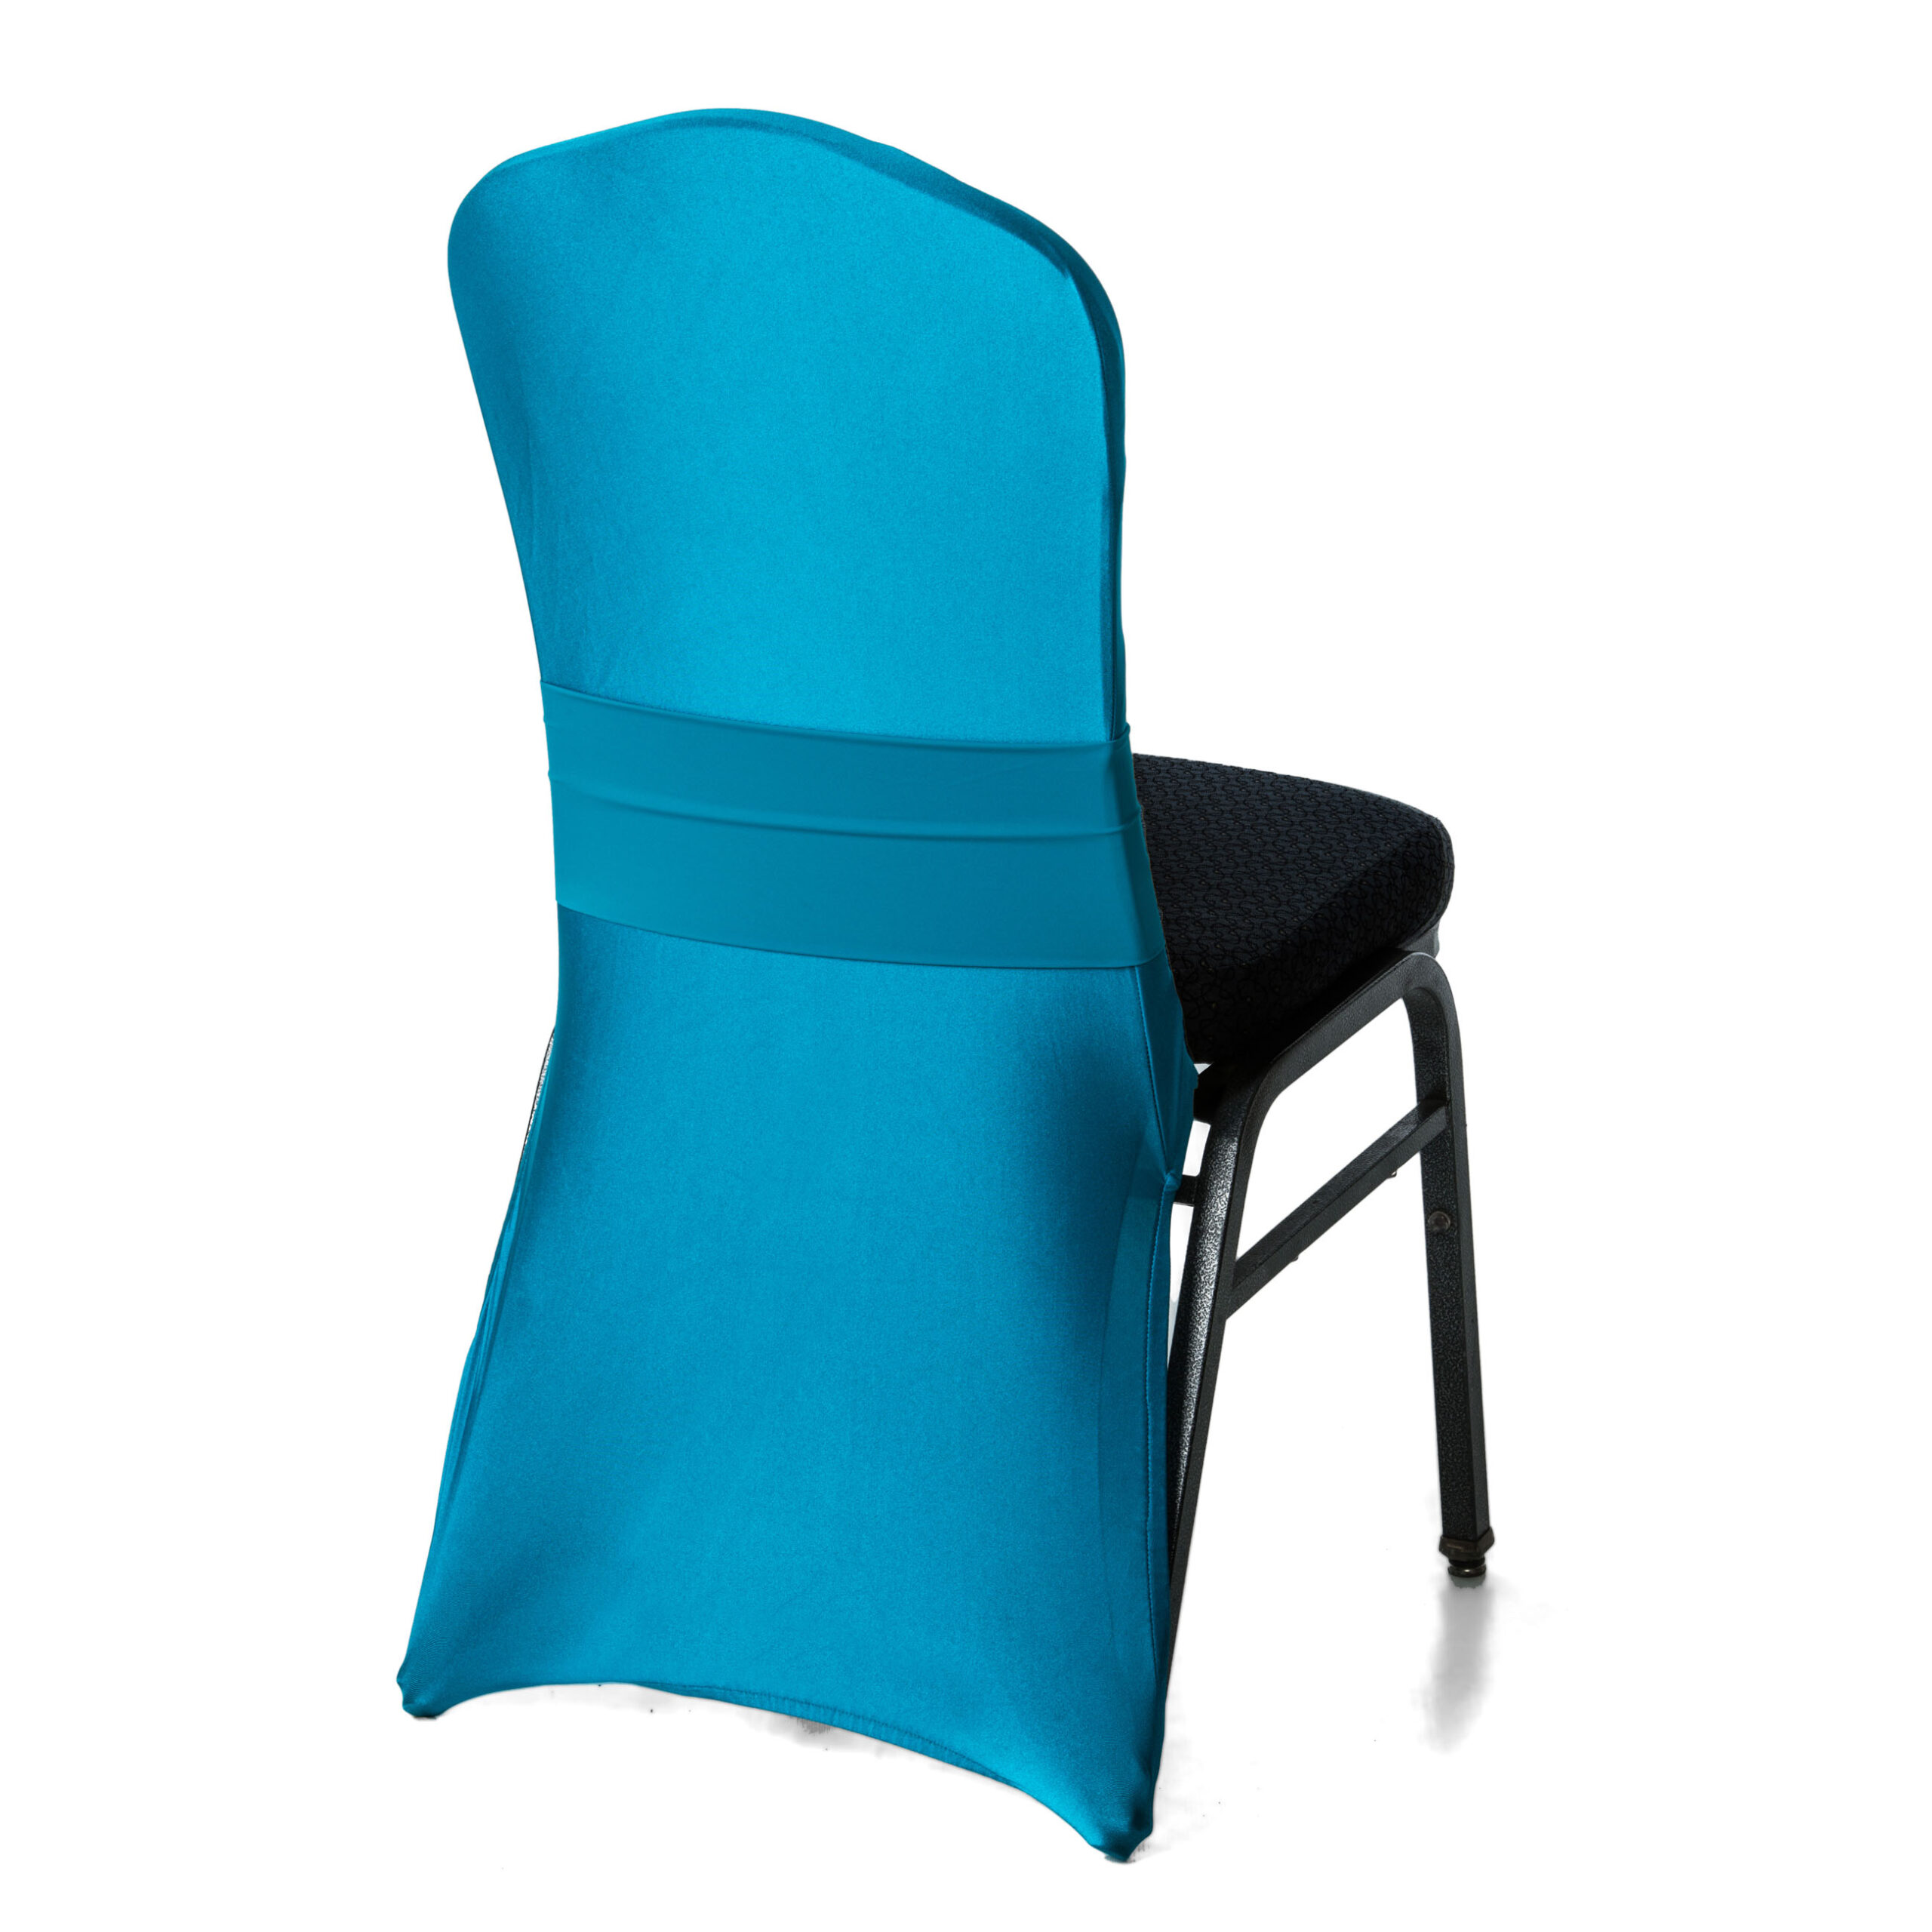 Teal Spandex Chairback - Over The Top